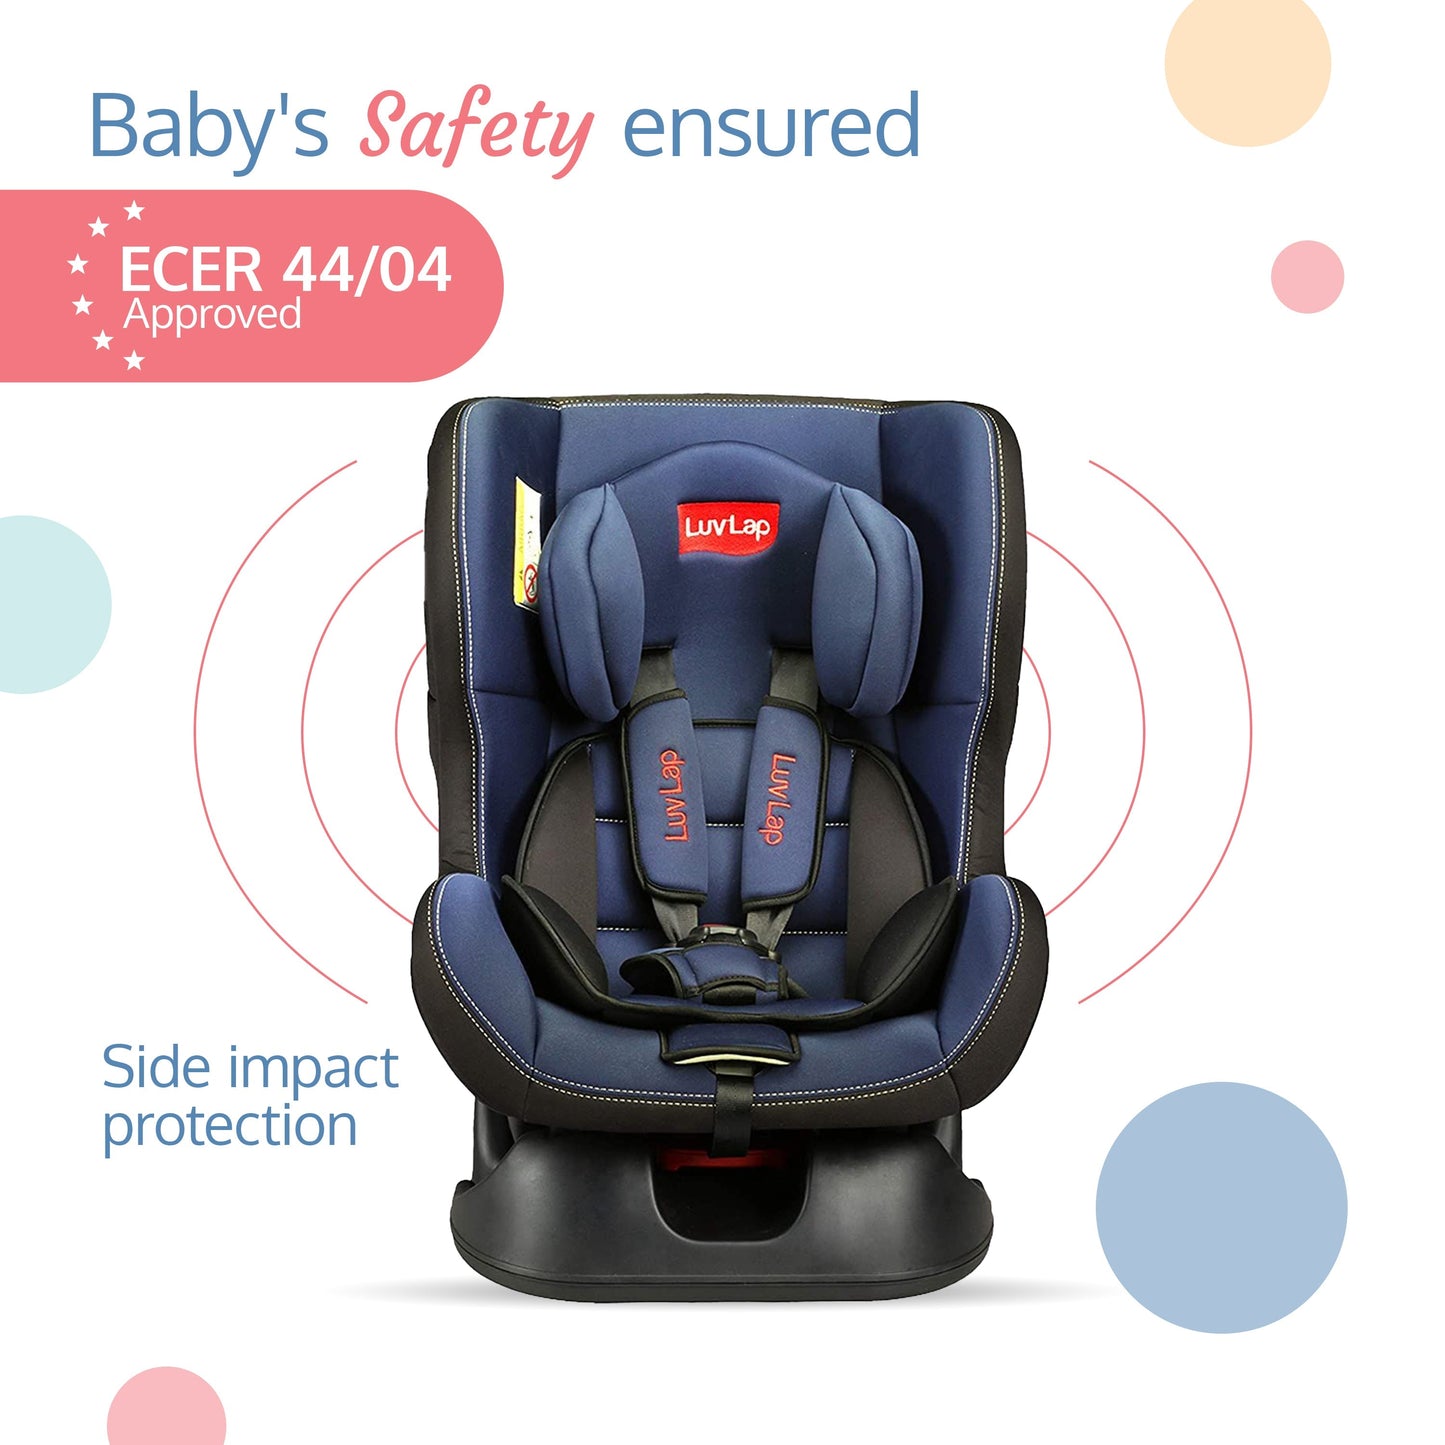 Sports Convertible Baby Car Seat, Blue